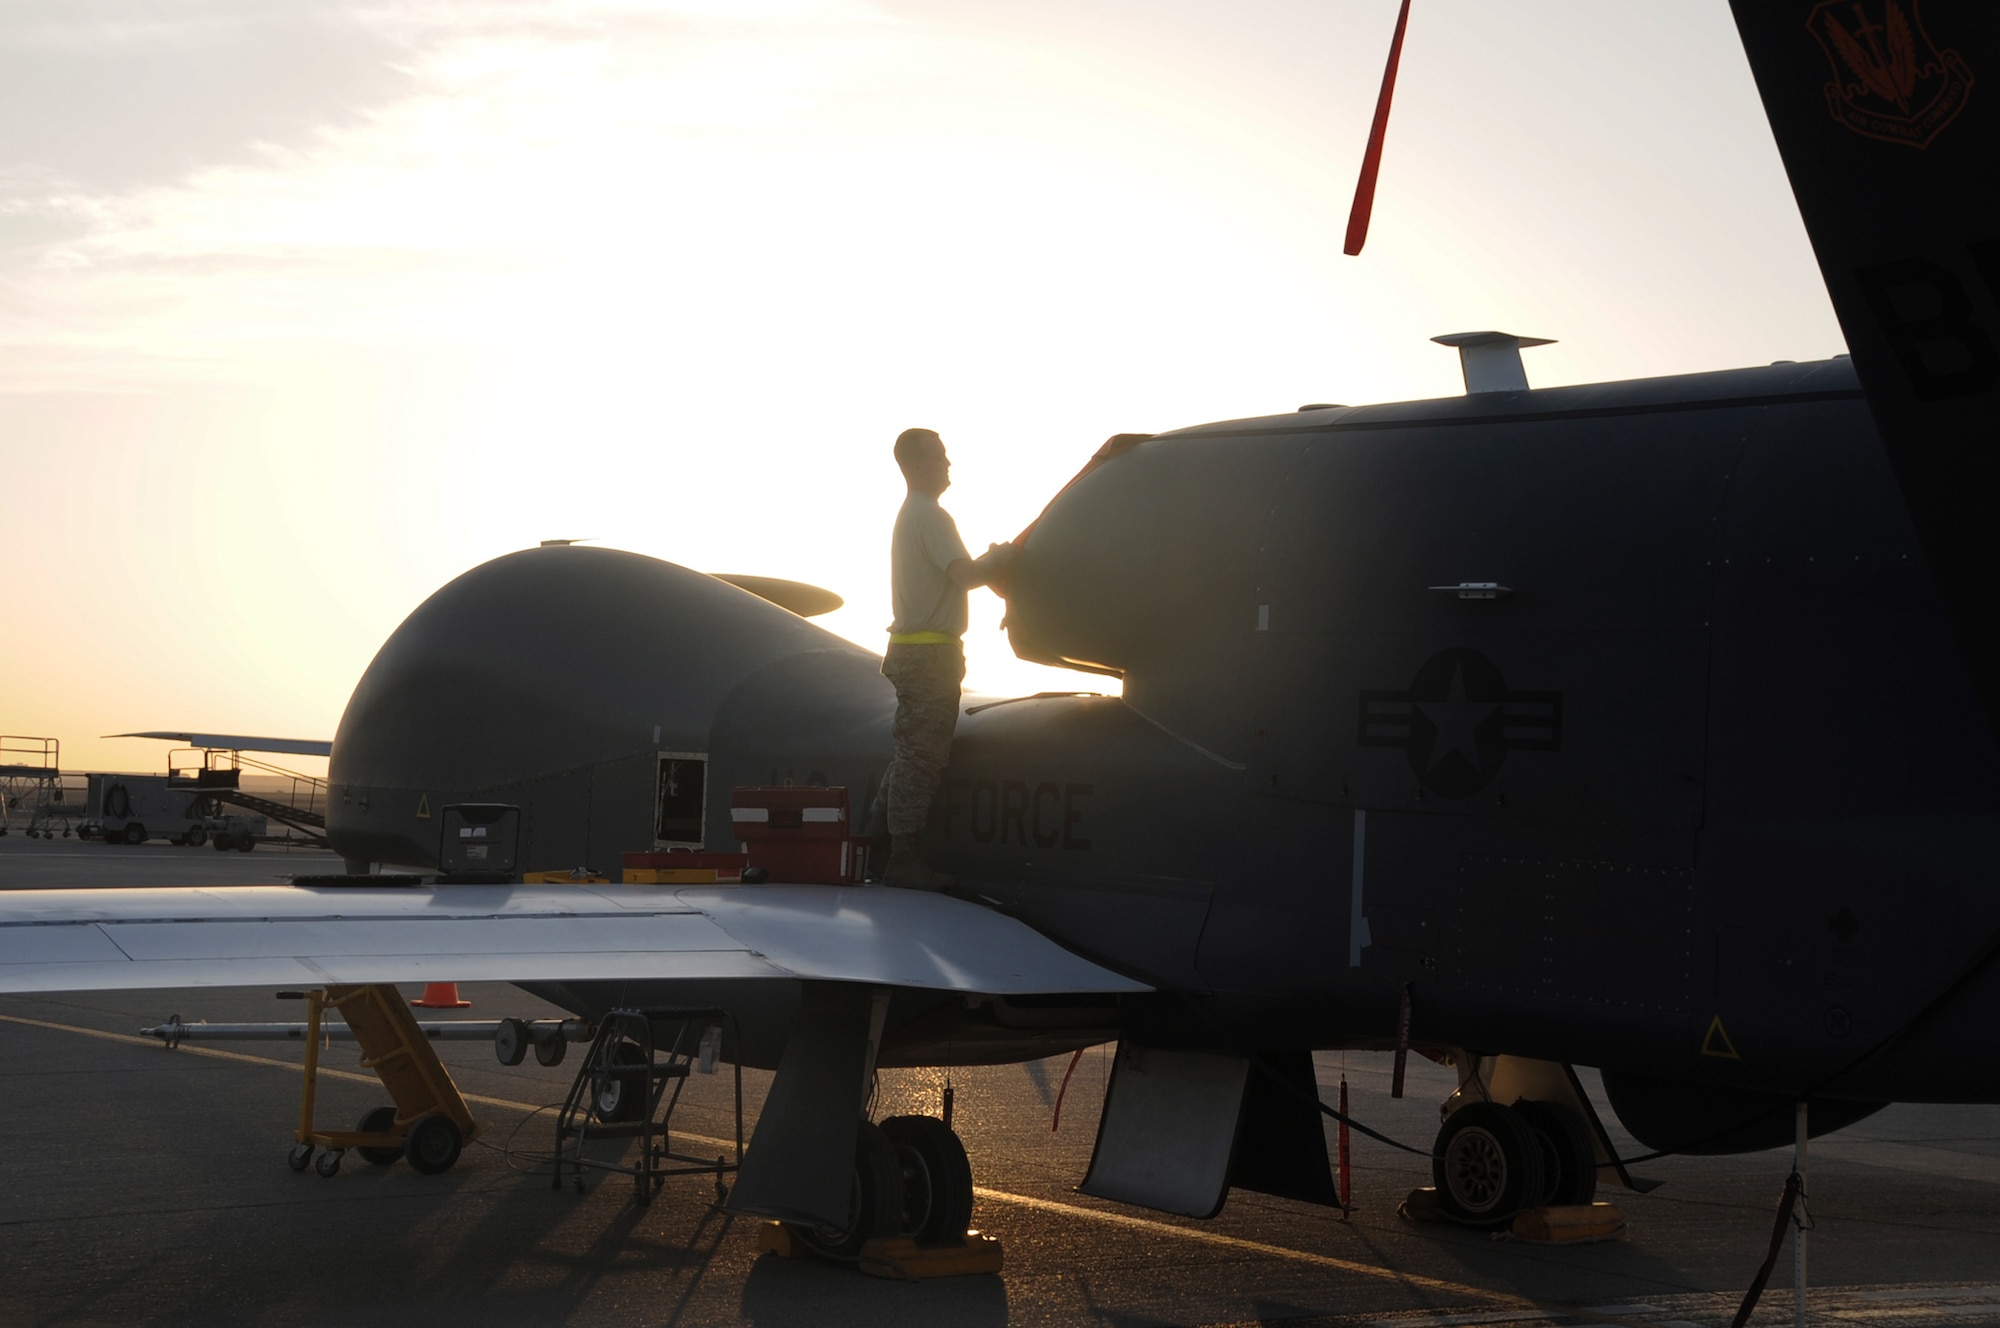 Staff Sgt. Michael Goenner goes through pre-flight servicing while preparing an RQ-4 Global Hawk for a combat mission Feb. 12, 2010, in Southwest Asia. The RQ-4s, assigned to the 380th Air Expeditionary Wing and deployed from Beale Air Force Base, Calif., achieved 1,500 combat sorties and 30,000 combat flying hours on Feb. 10 and 11 respectively. Sergeant Goenner is an RQ-4 Global Hawk crew chief with the 380th Expeditionary Aircraft Maintenance Squadron Hawk aircraft maintenance unit. (U.S. Air Force photo/Master Sgt. Scott T. Sturkol)